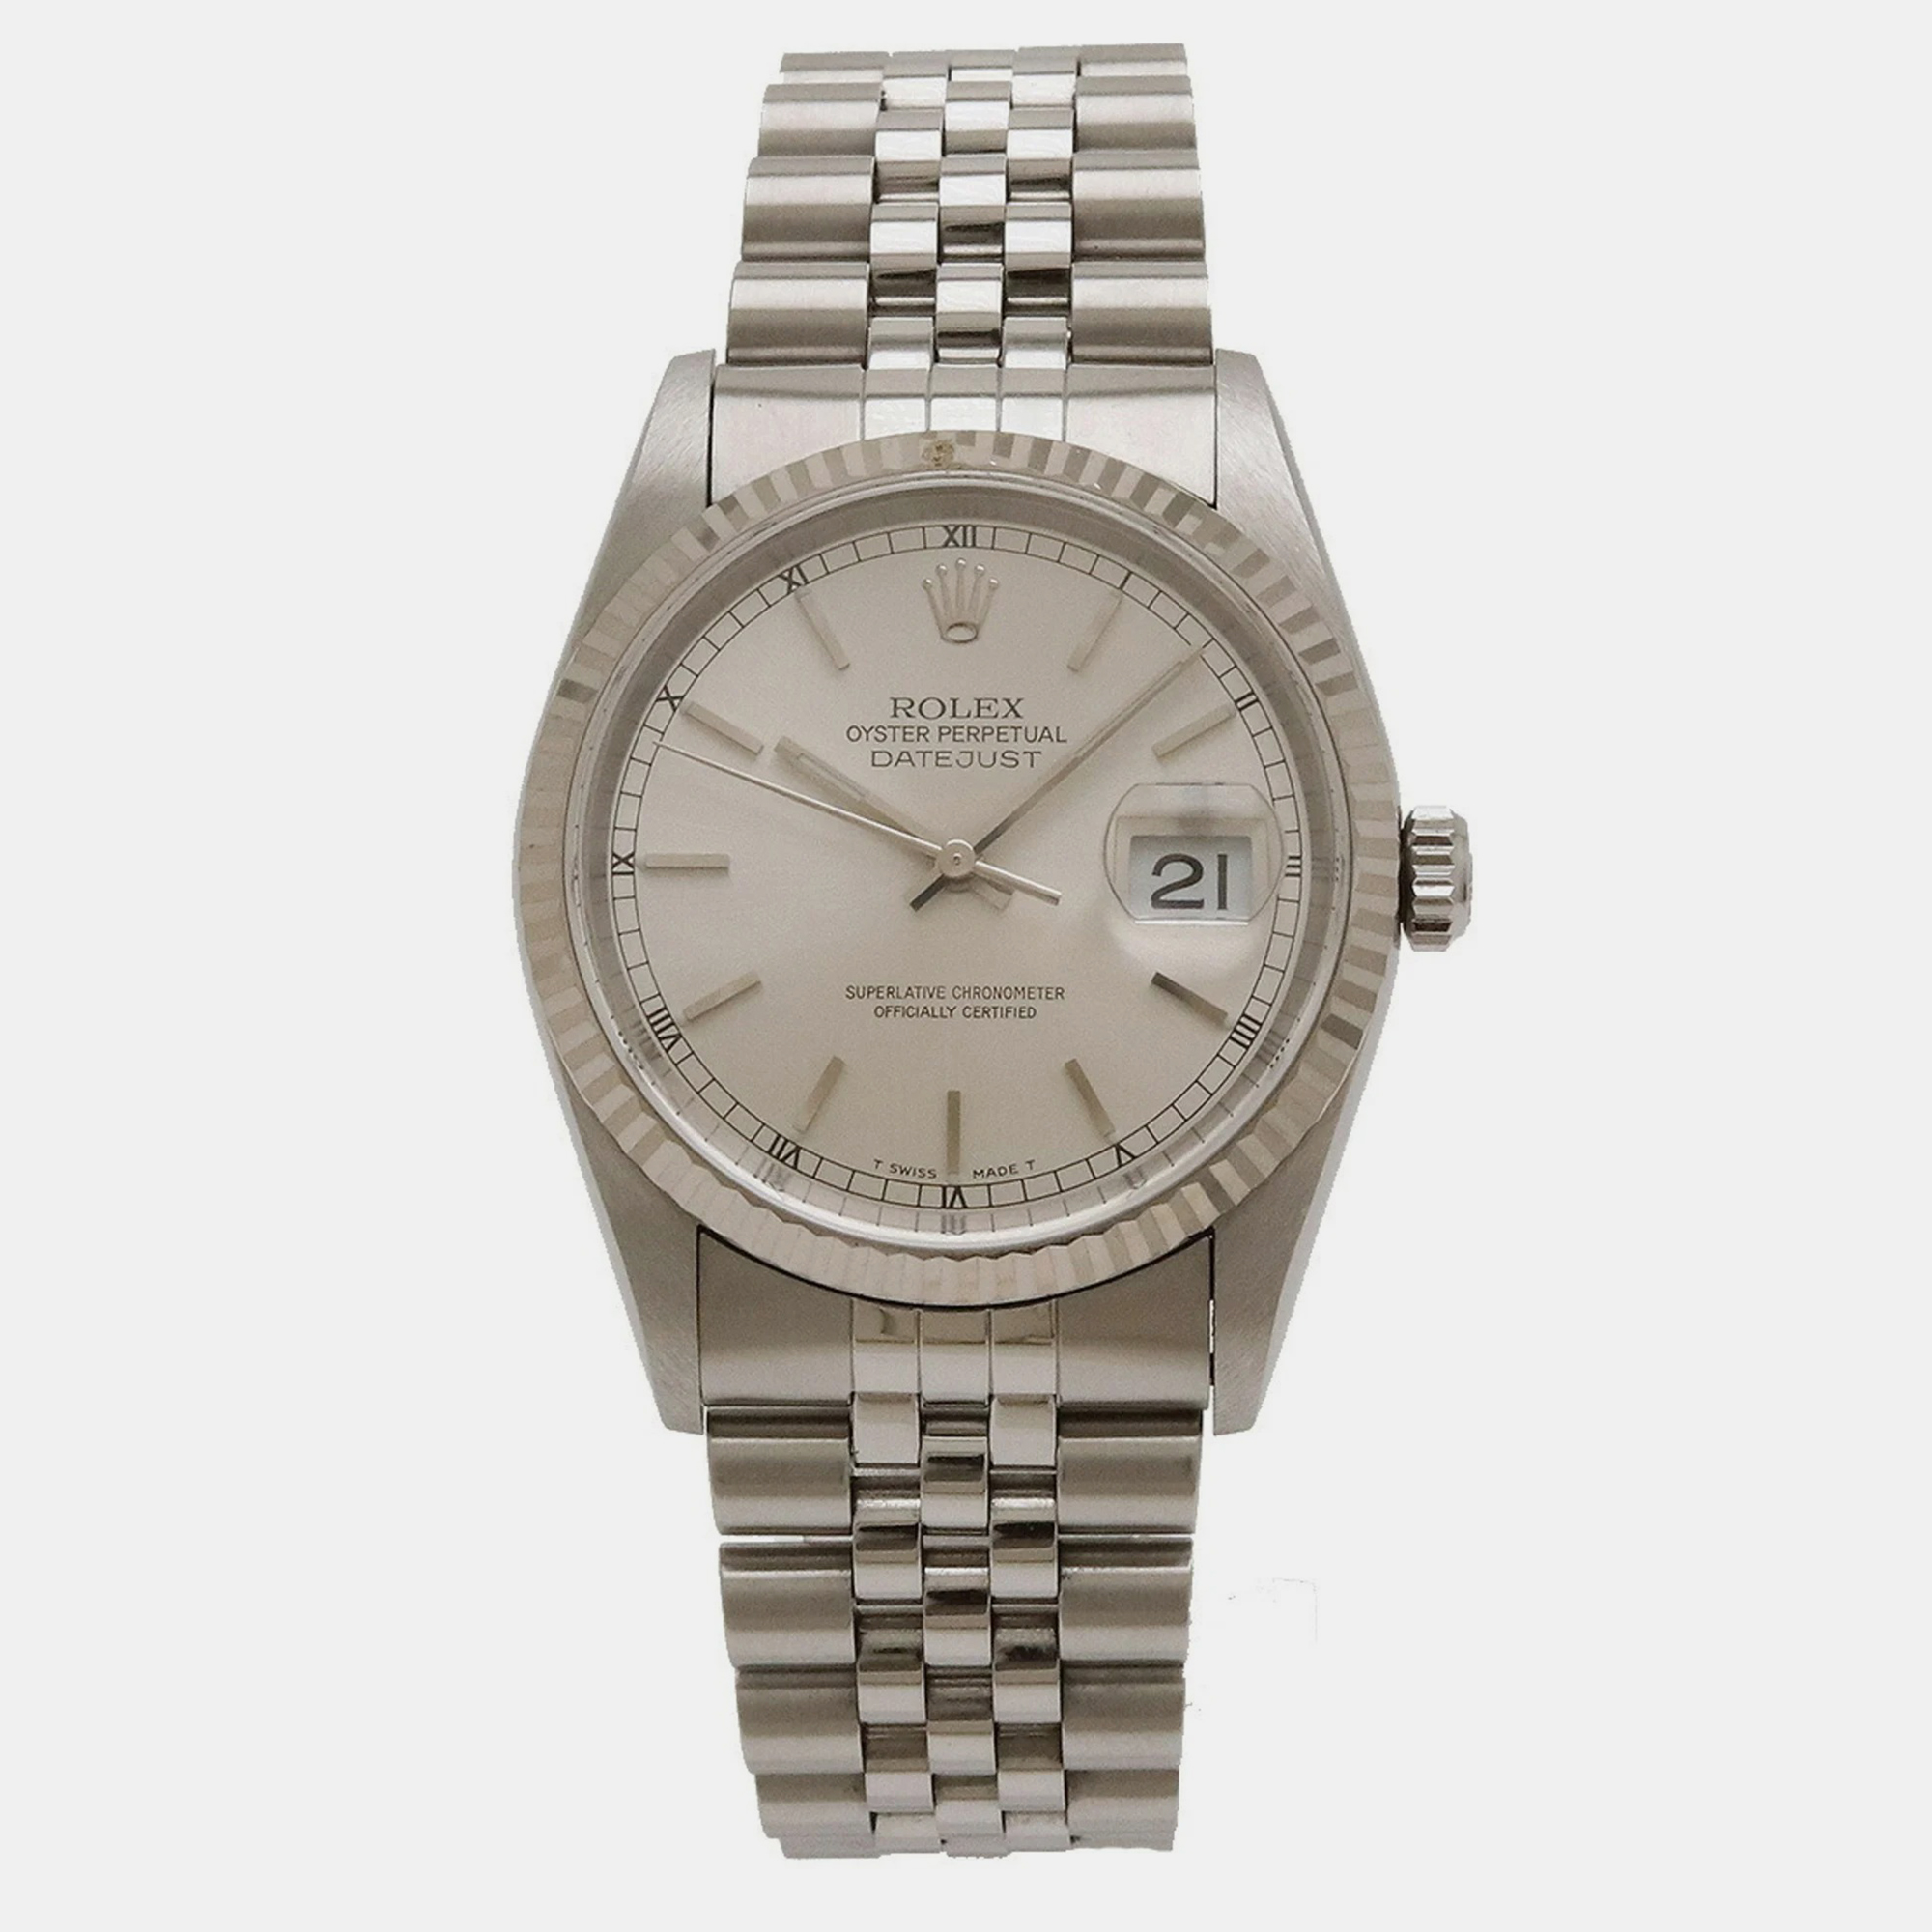 

Rolex Silver 18k White Gold And Stainless Steel Datejust 16234 Automatic Men's Wristwatch 35 mm